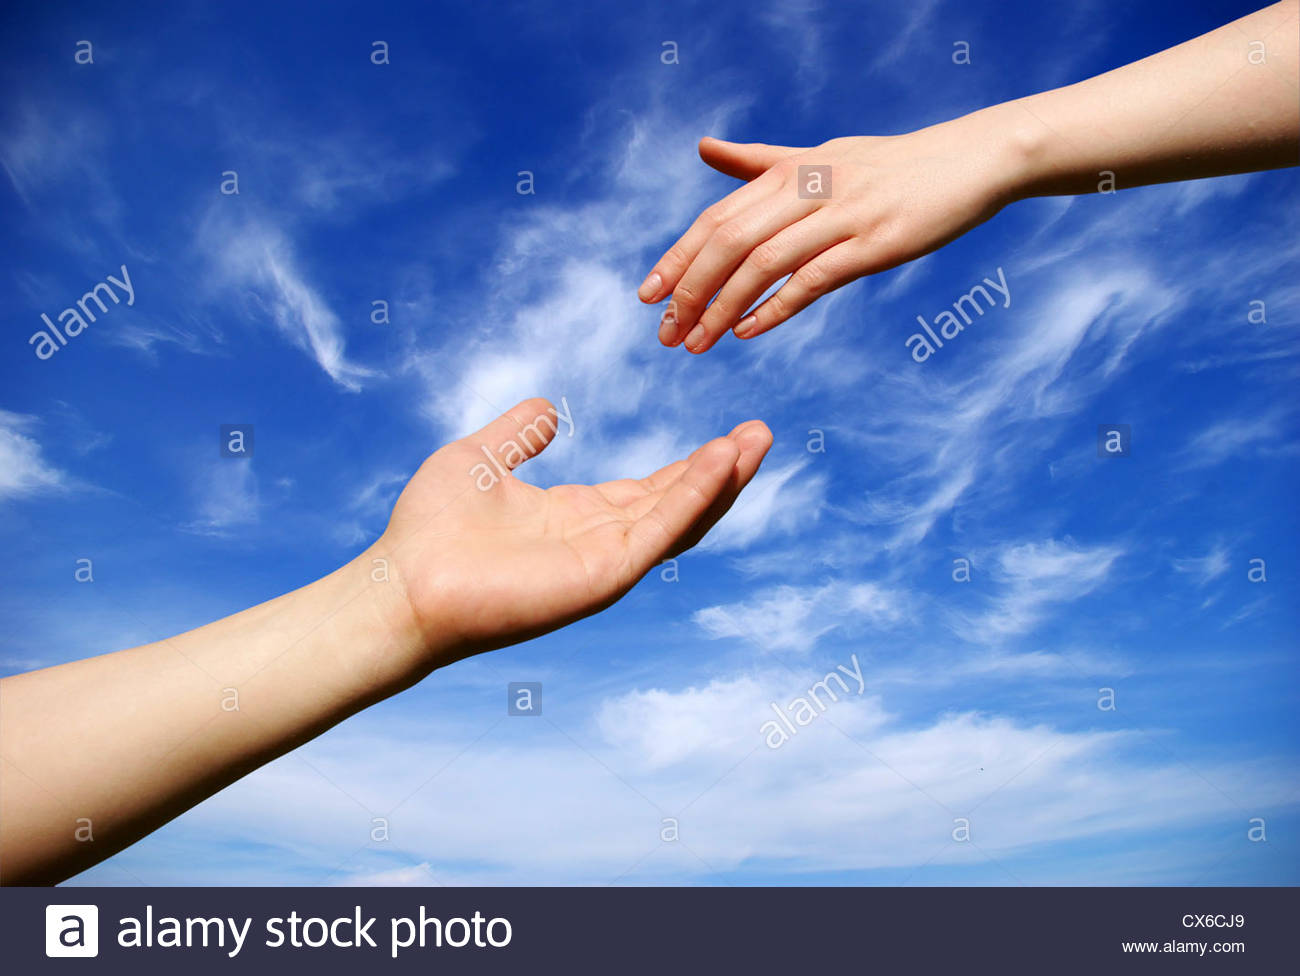 Helping Hand With The Sky Background Stock Photo